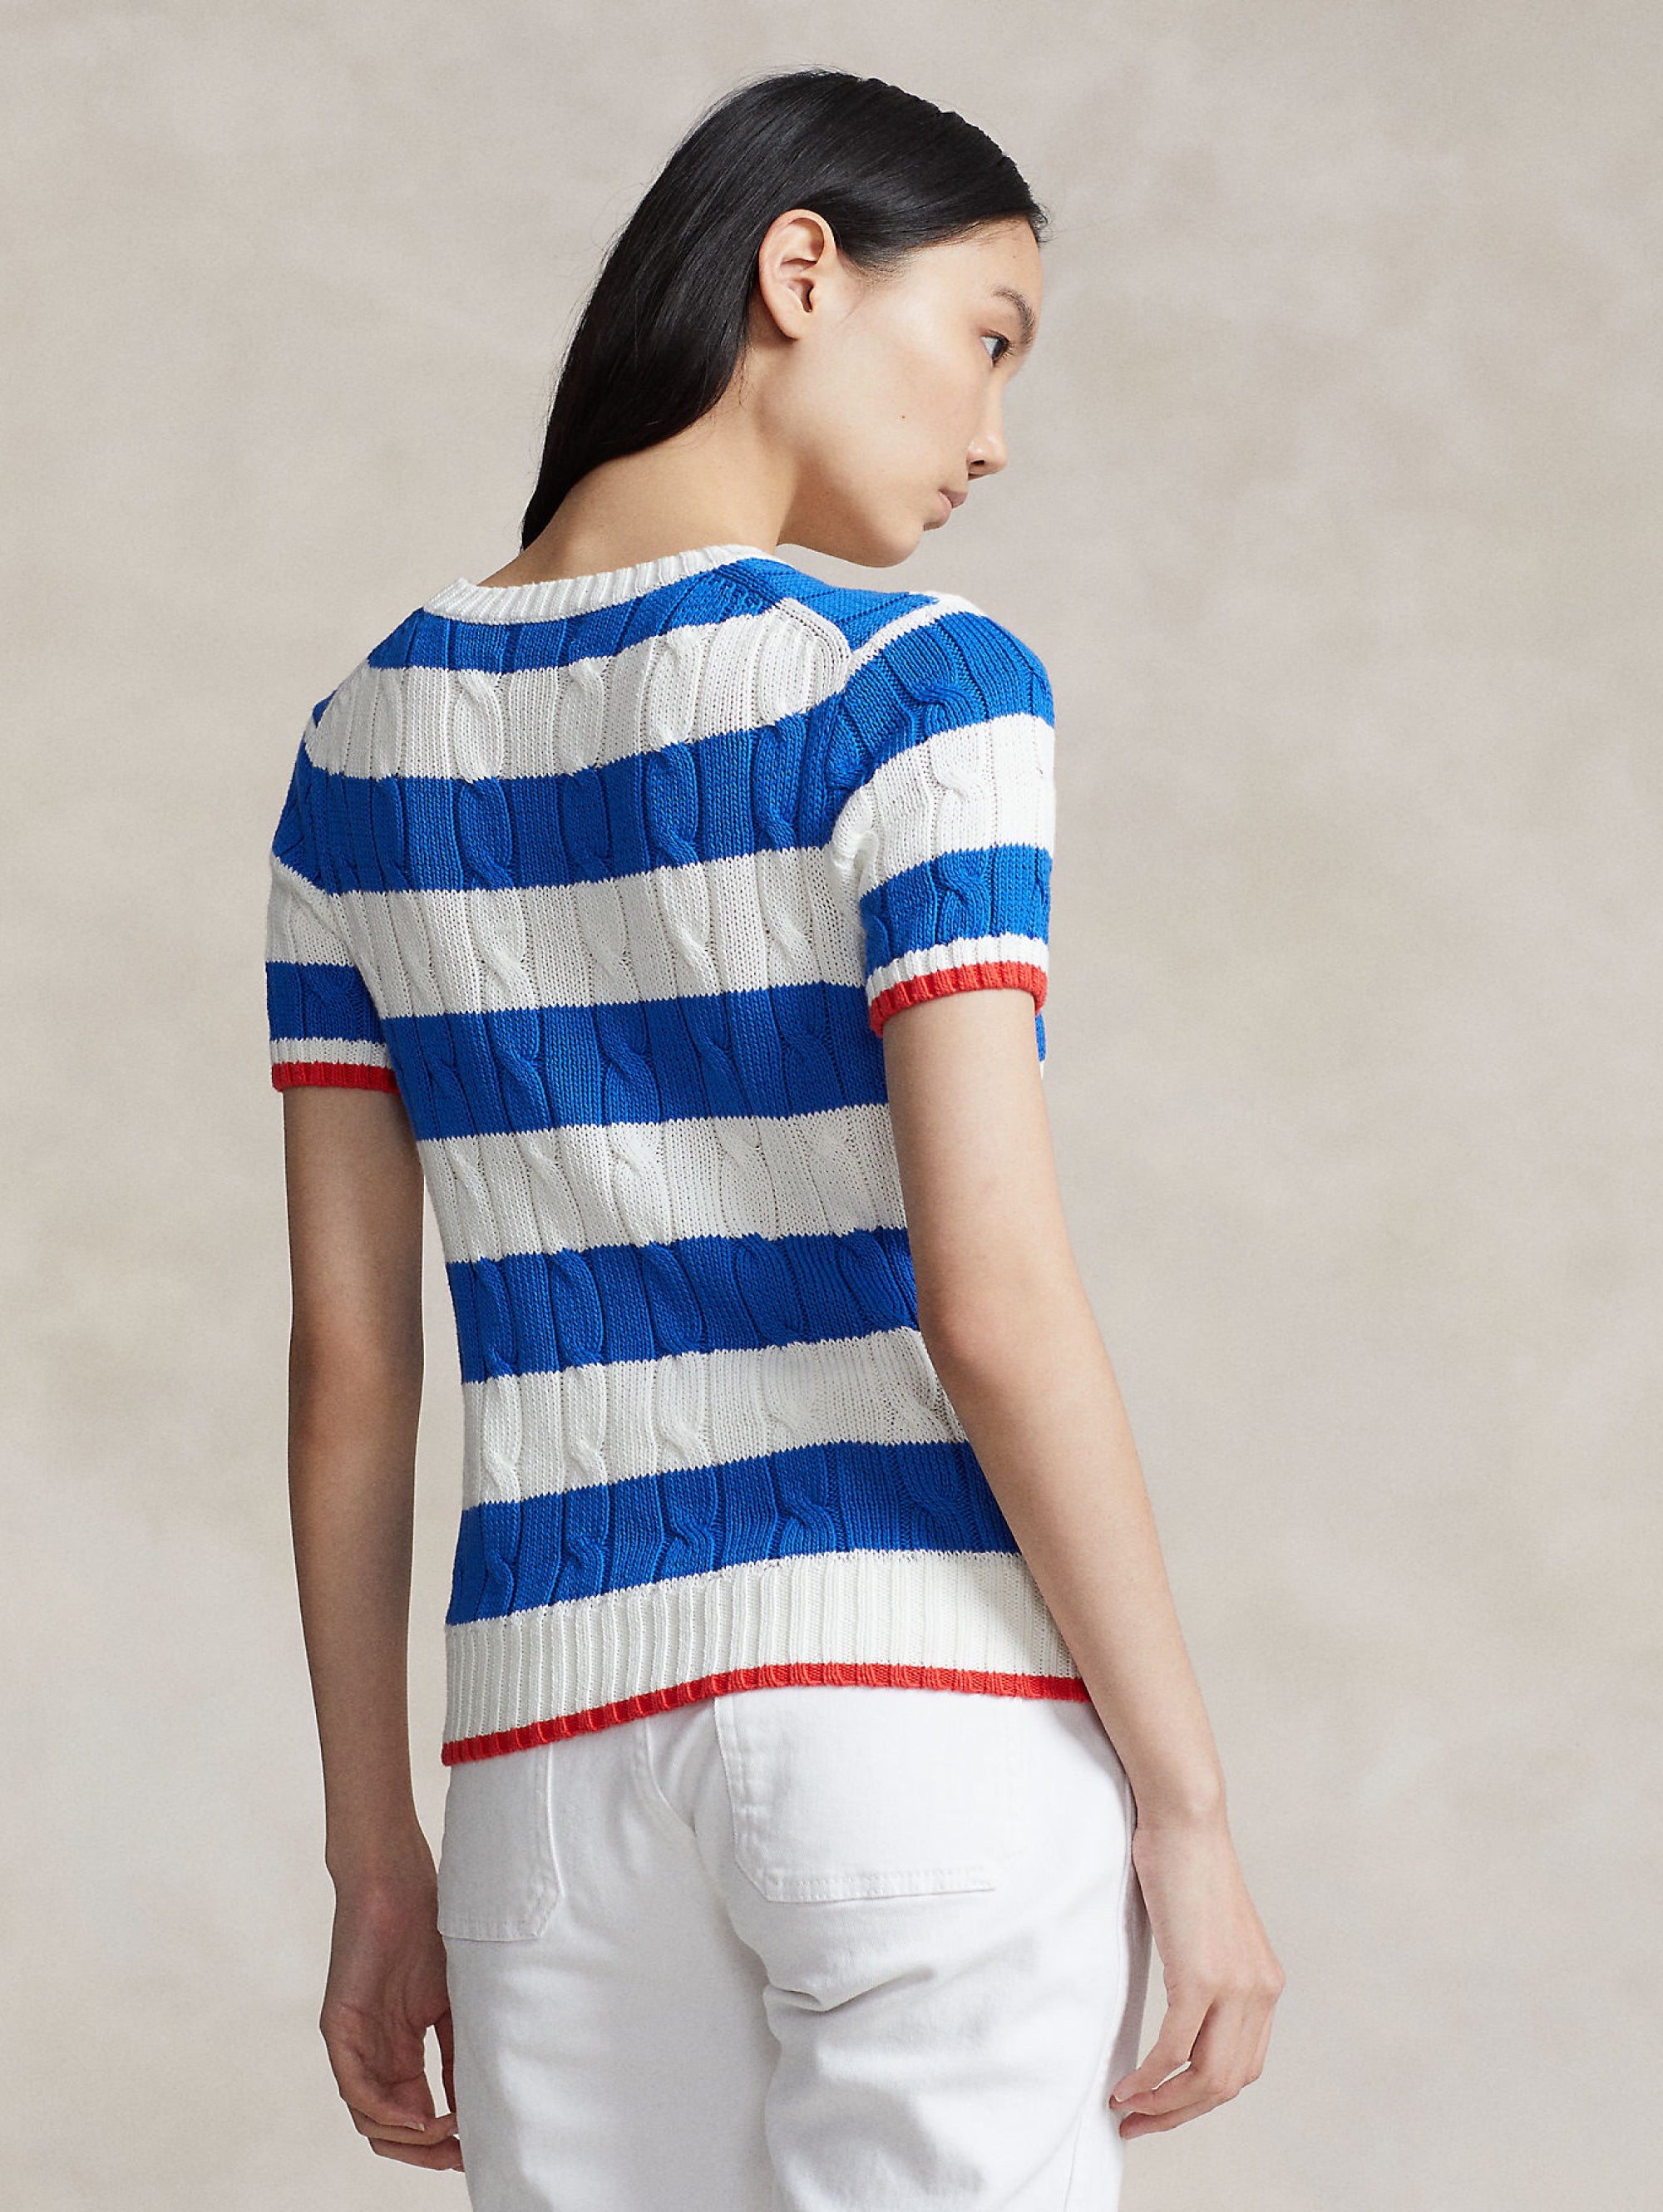 White/Blue Striped Short Sleeve Shirt with Braids